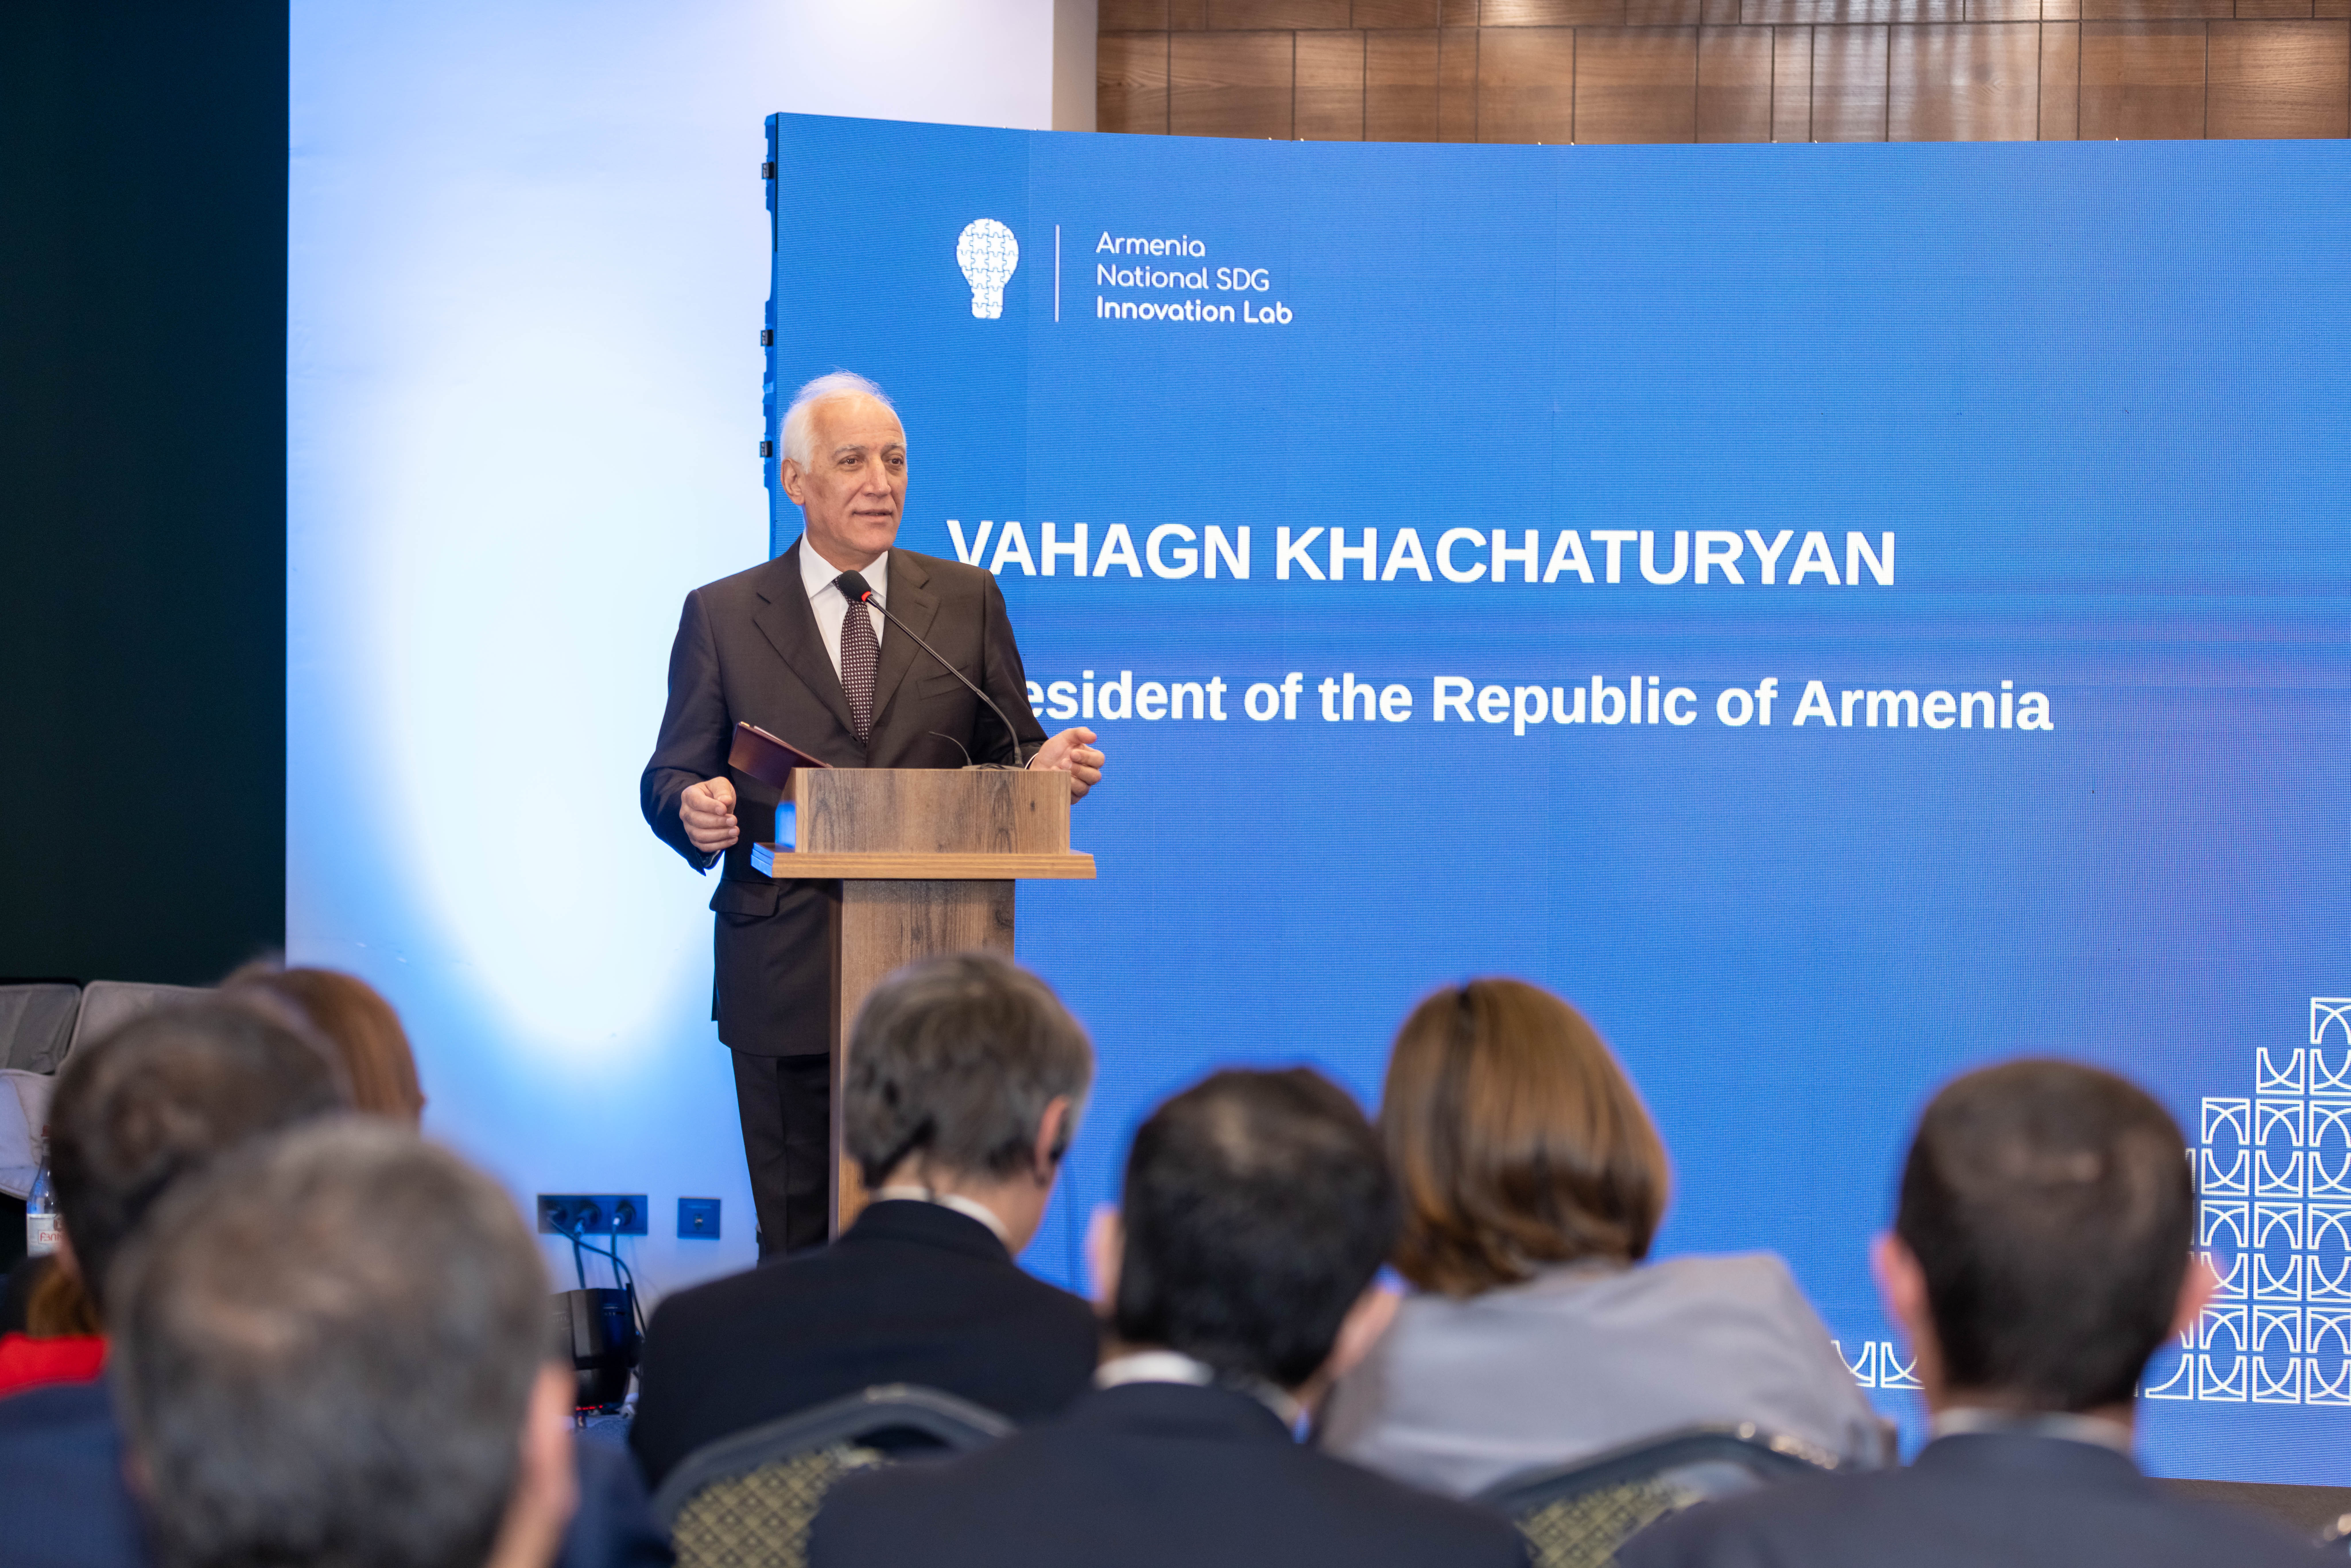 President Vahagn Khachaturyan welcomed the guests of the event